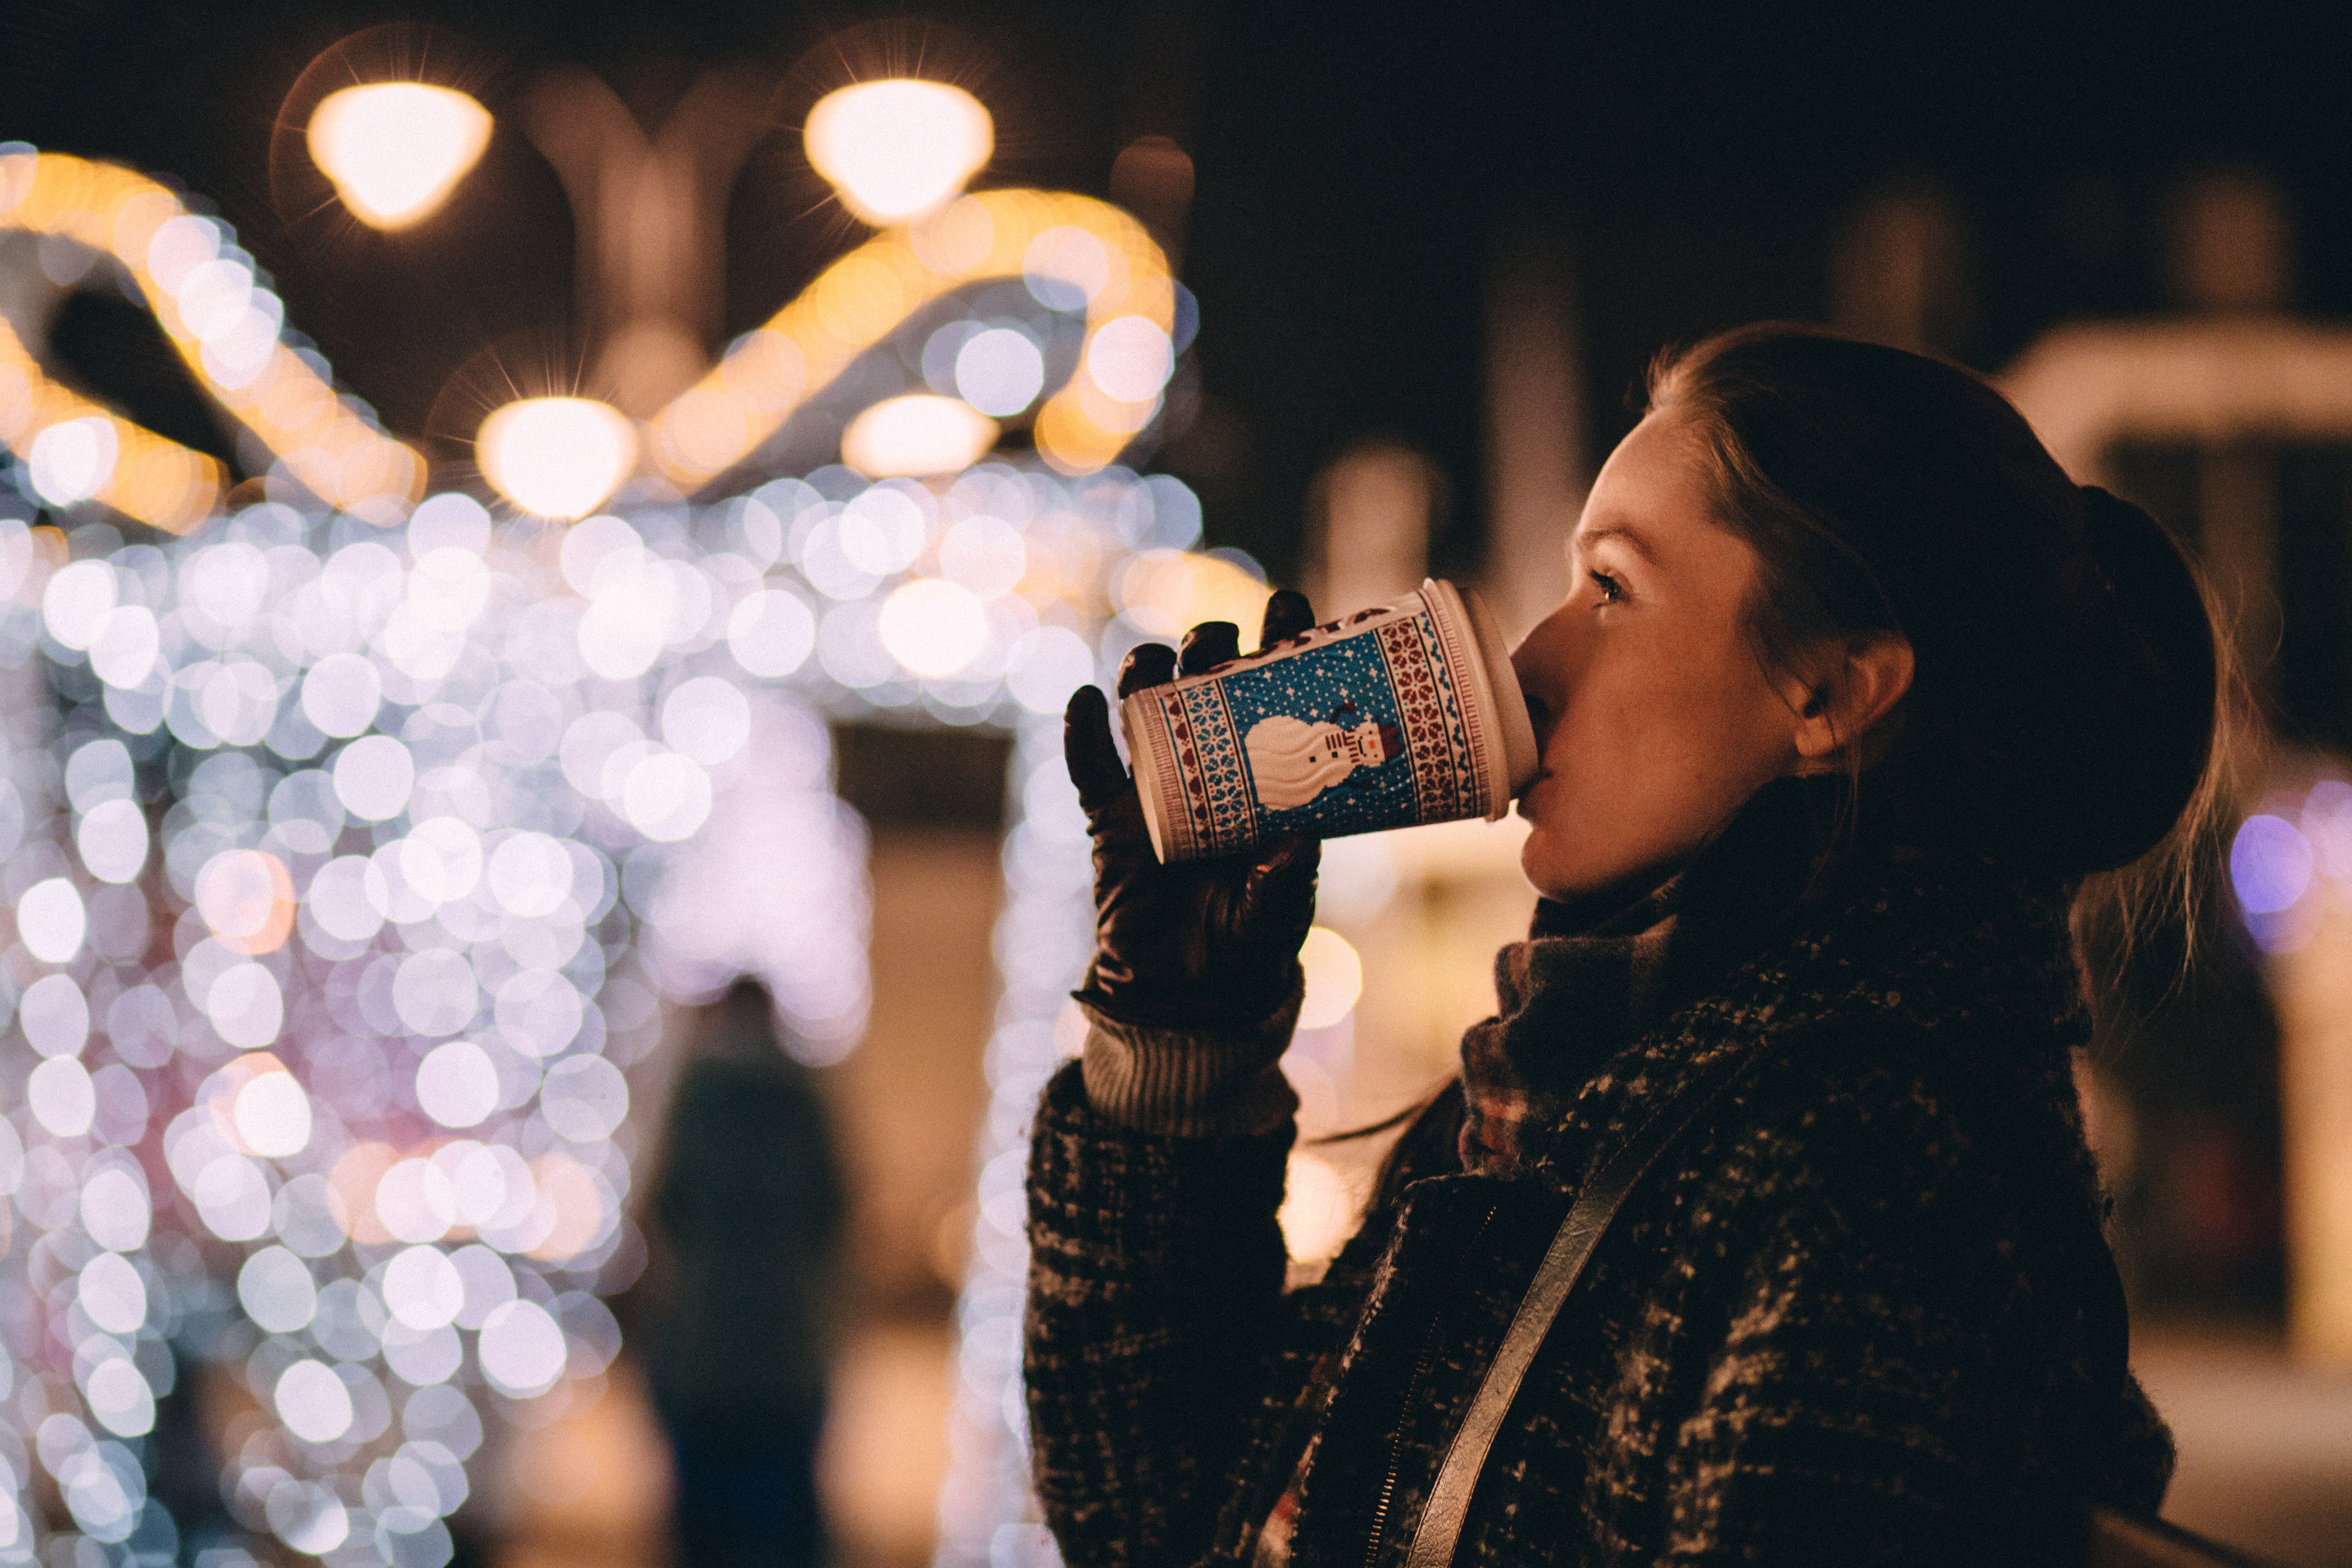 Woman Drinking Hot Coffee in front of Christmas Display